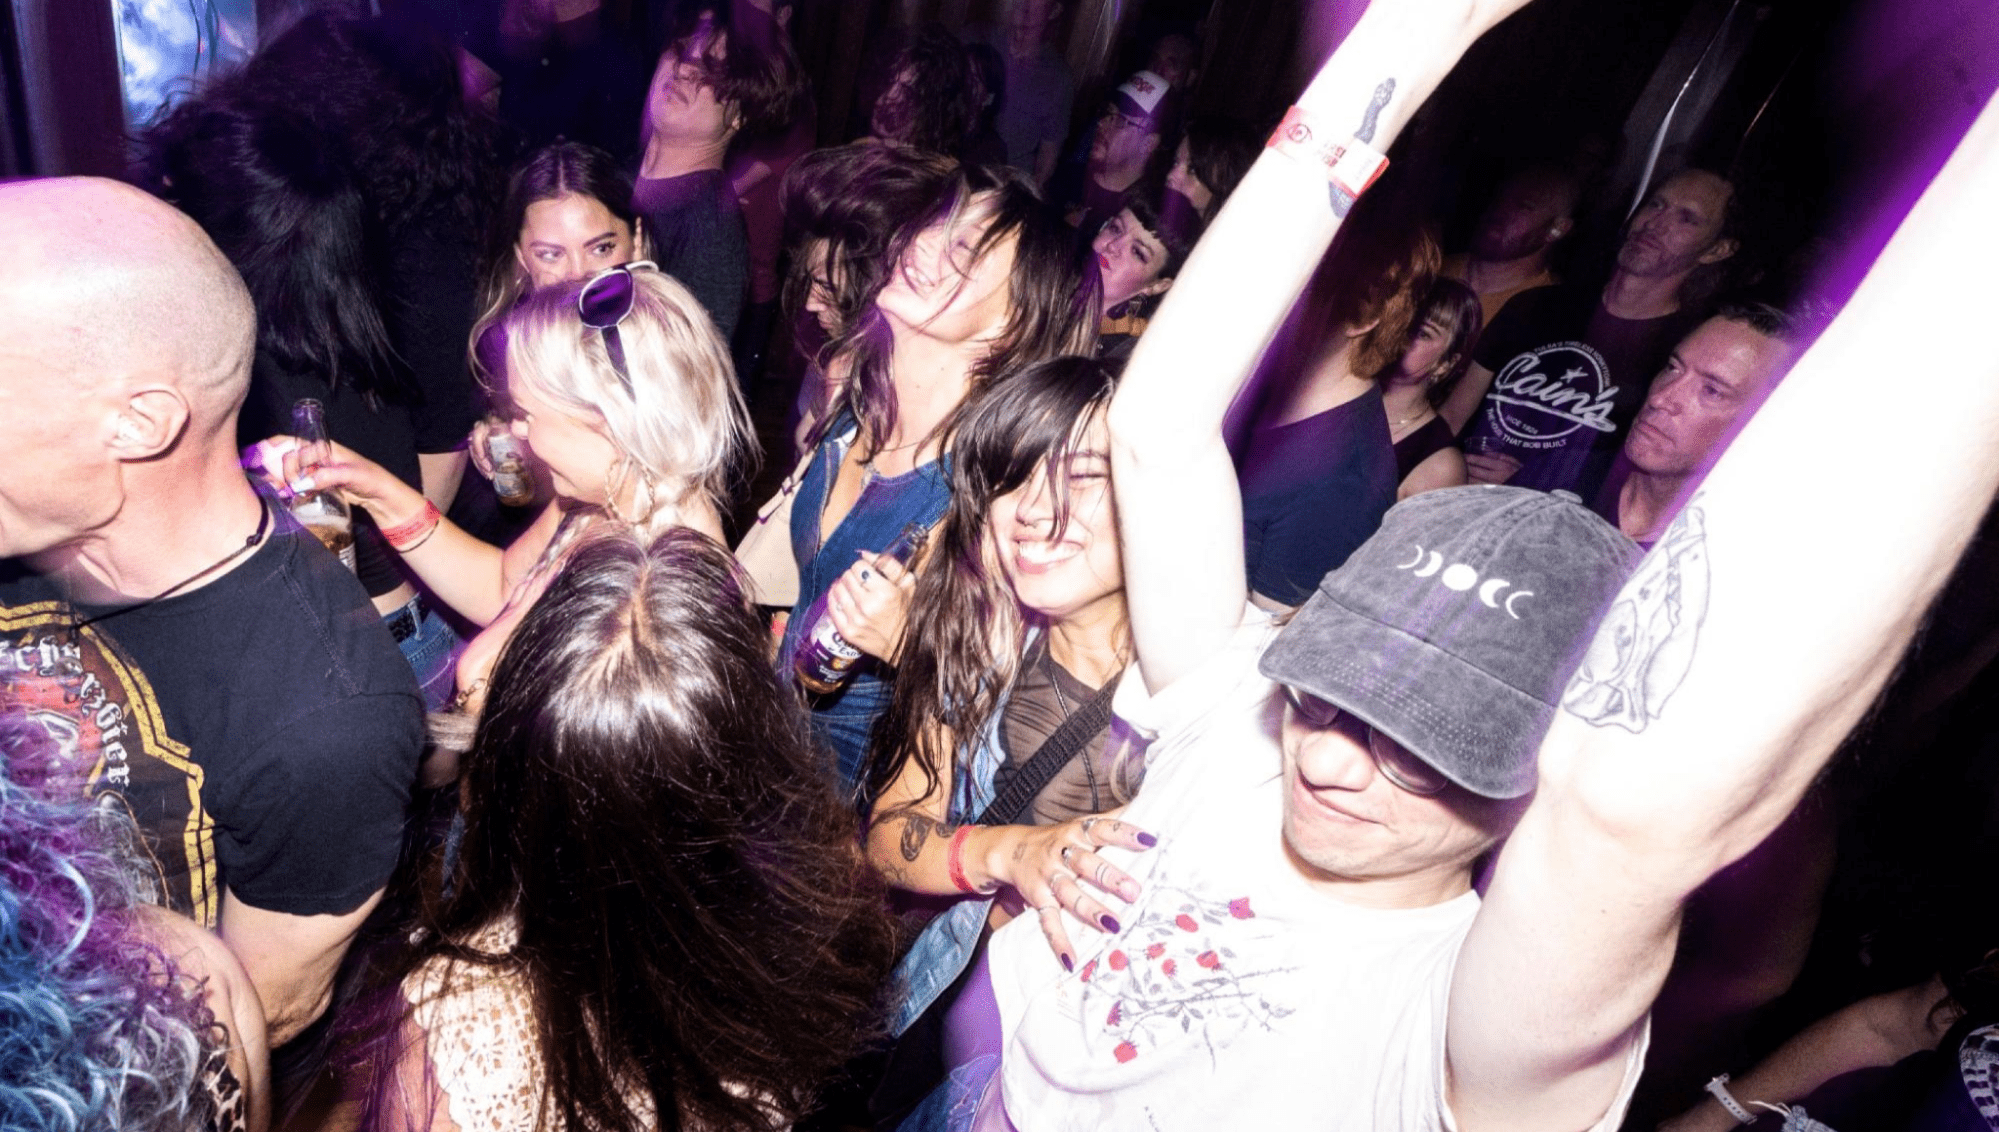 Party-goers dancing in a crowd